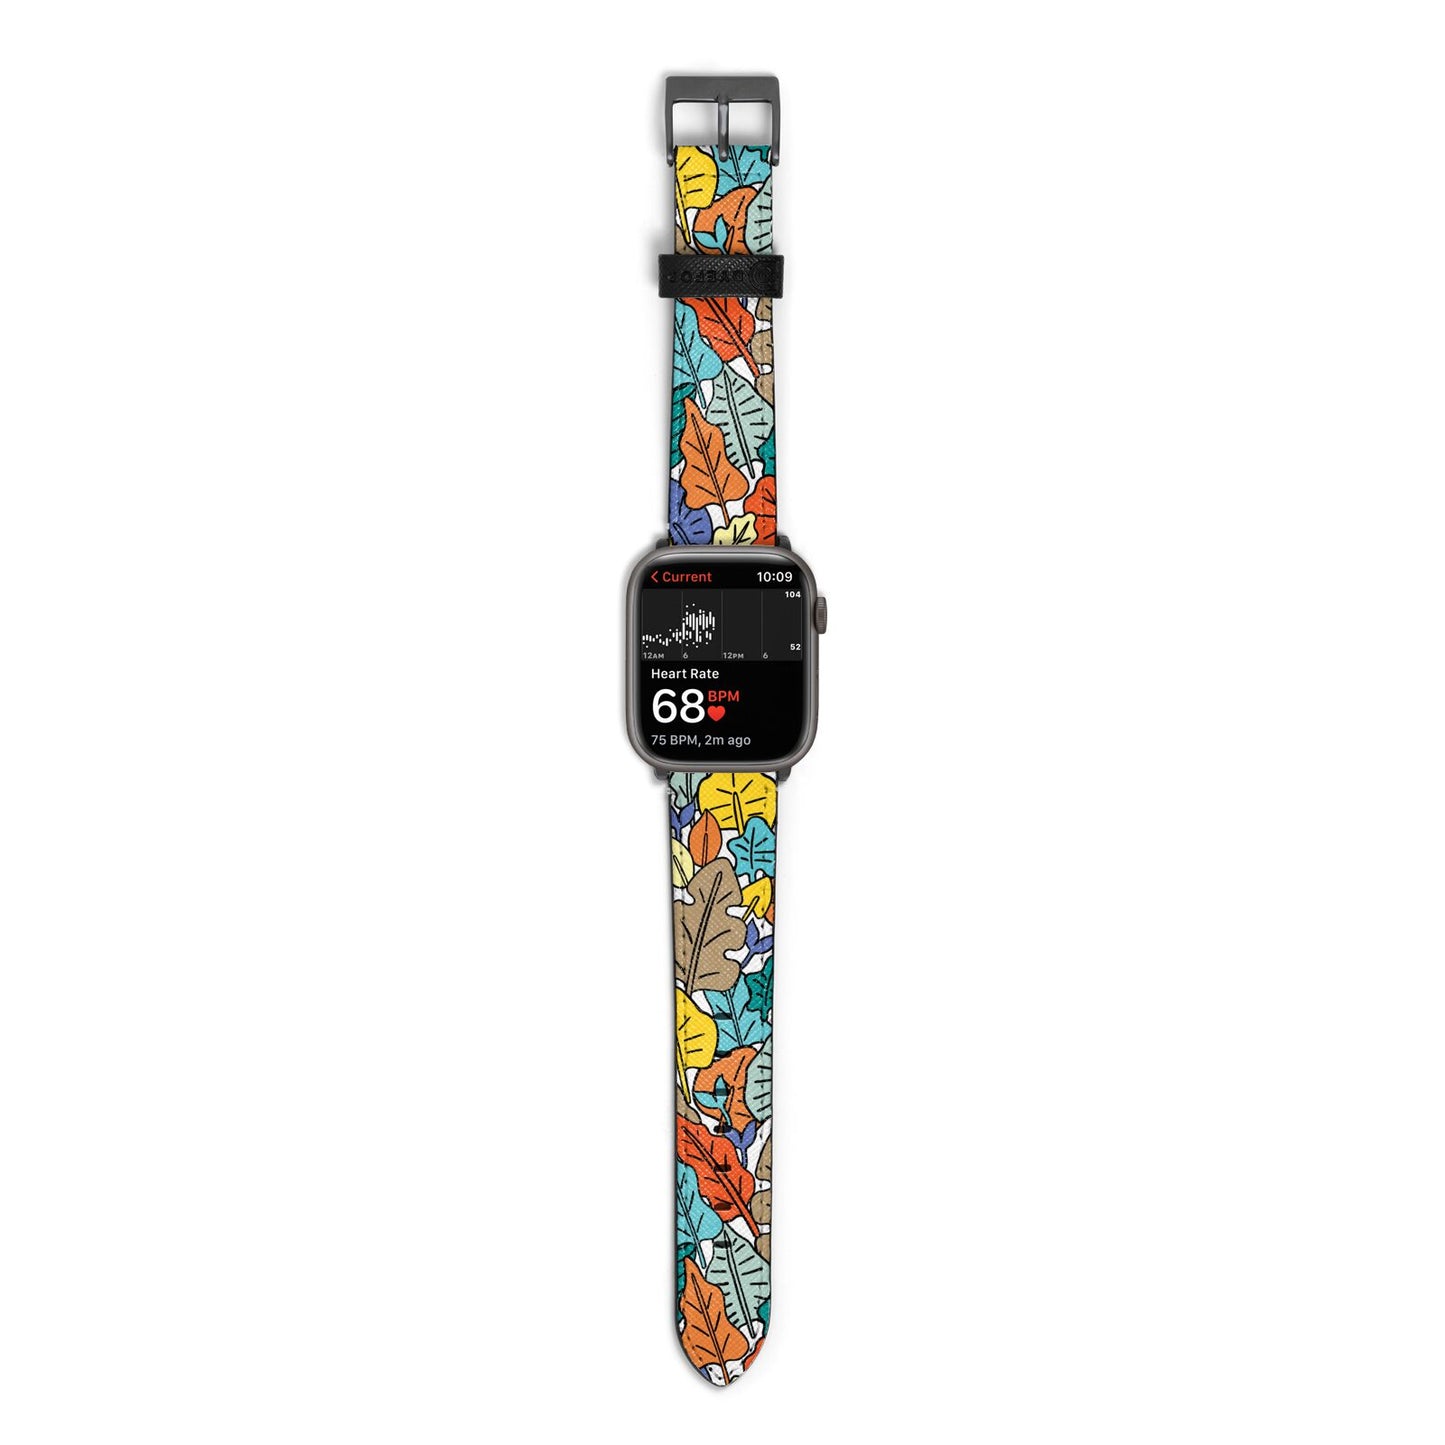 Autumn Leaves Apple Watch Strap Size 38mm with Space Grey Hardware